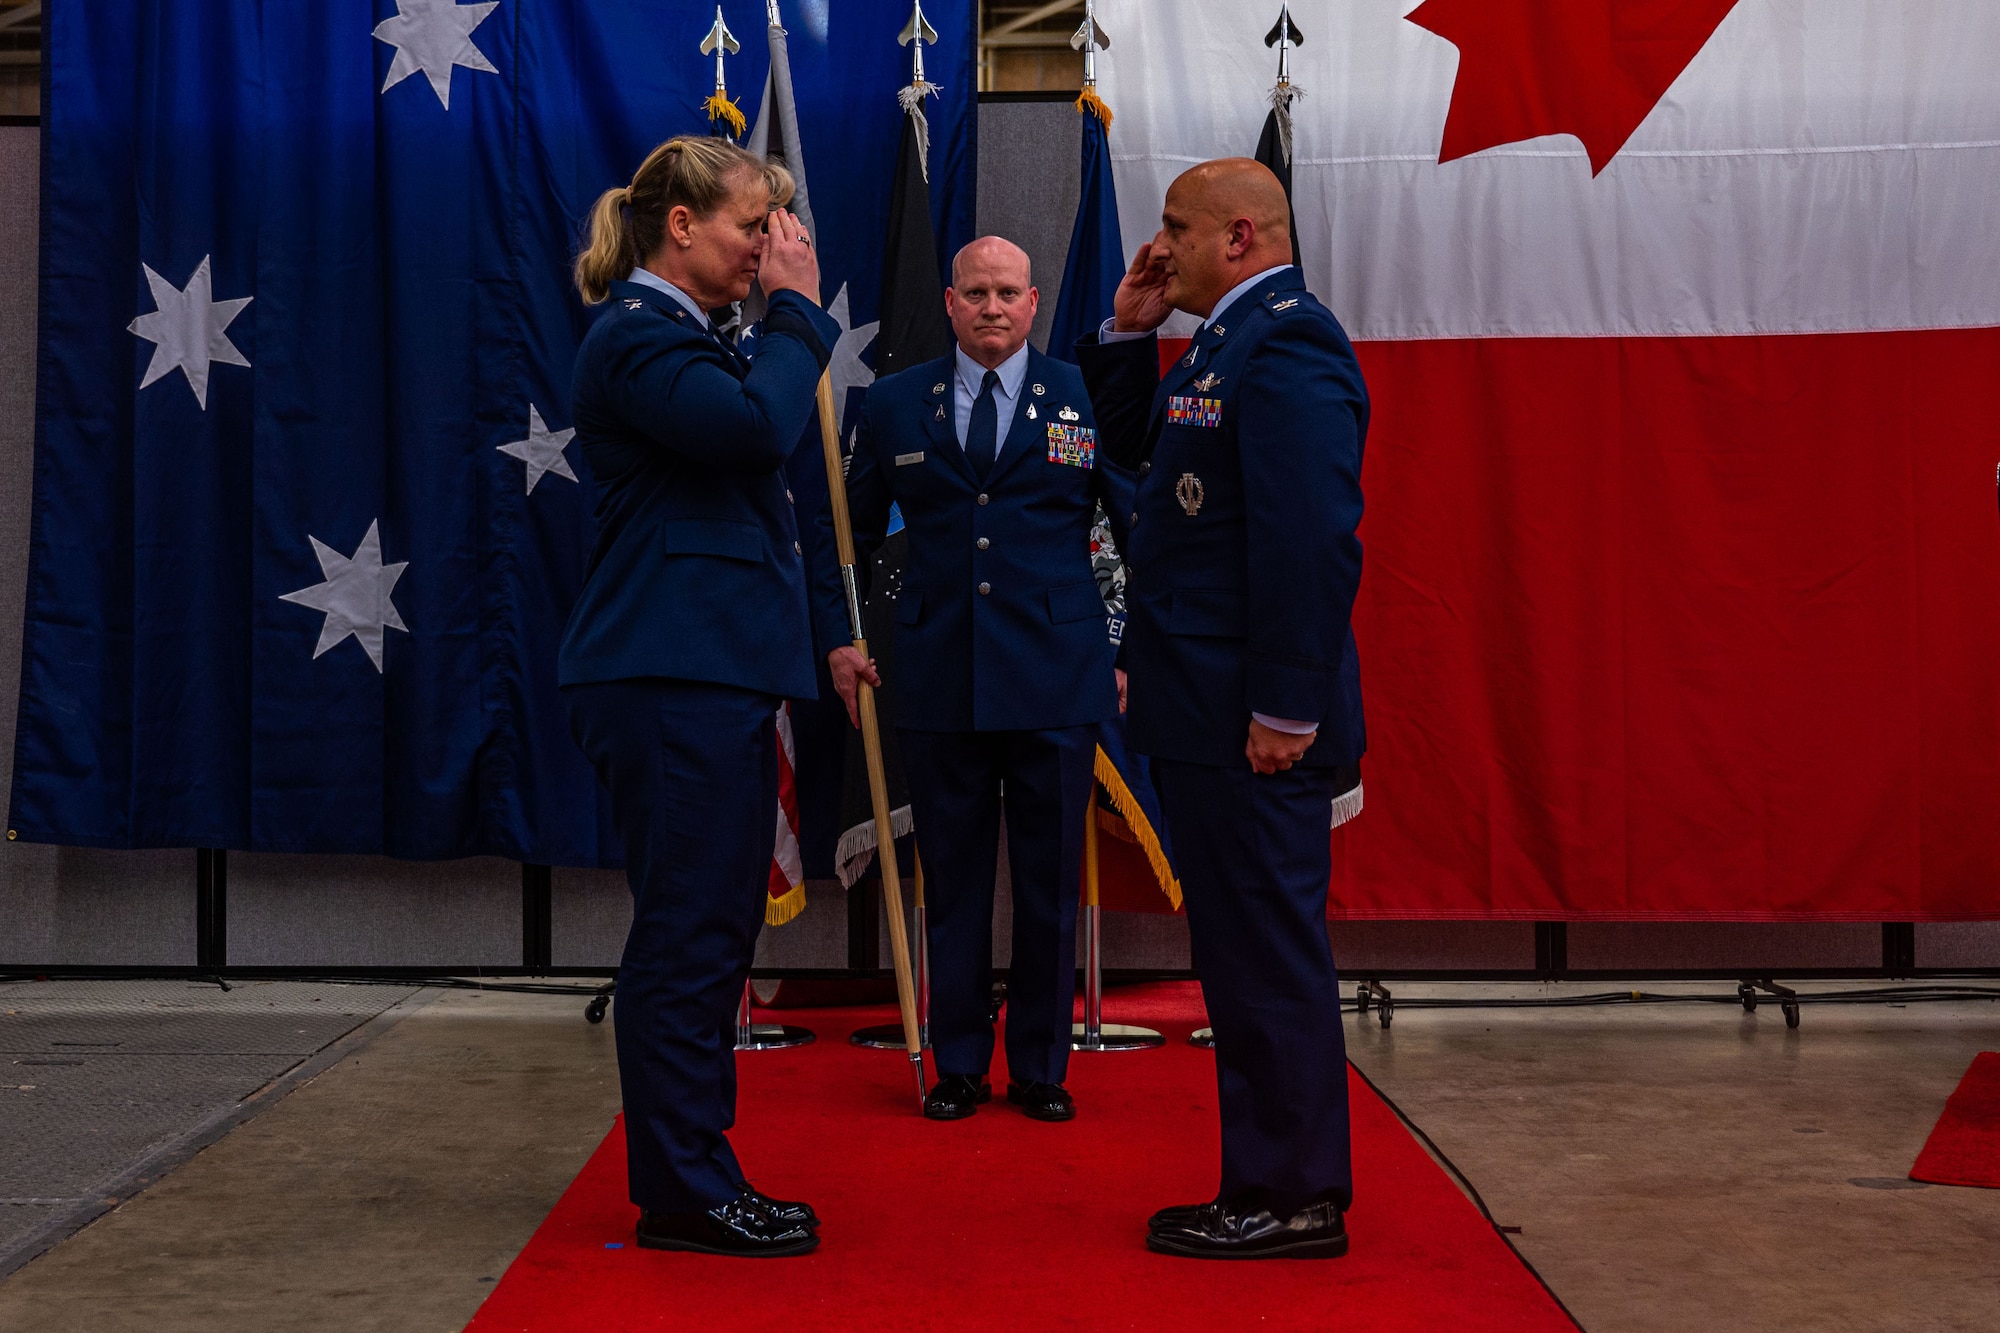 Col. Phillip Verroco, right, the newly appointed Space Delta 5 (DEL 5) commander and Combined Space Operations Center (CSpOC) director, renders his first salute in his new role to U.S. Space Force Maj. Gen. DeAnna Burt, Combined Force Space Component Command (CFSCC) commander and Space Operations Command (SpOC) vice commander, during the DEL 5 change of command ceremony at Vandenberg Space Force Base, Calif., May 24, 2022. Previously, Verroco served as DEL 5’s deputy director. (U.S. Space Force photo by Tech. Sgt. Luke Kitterman)